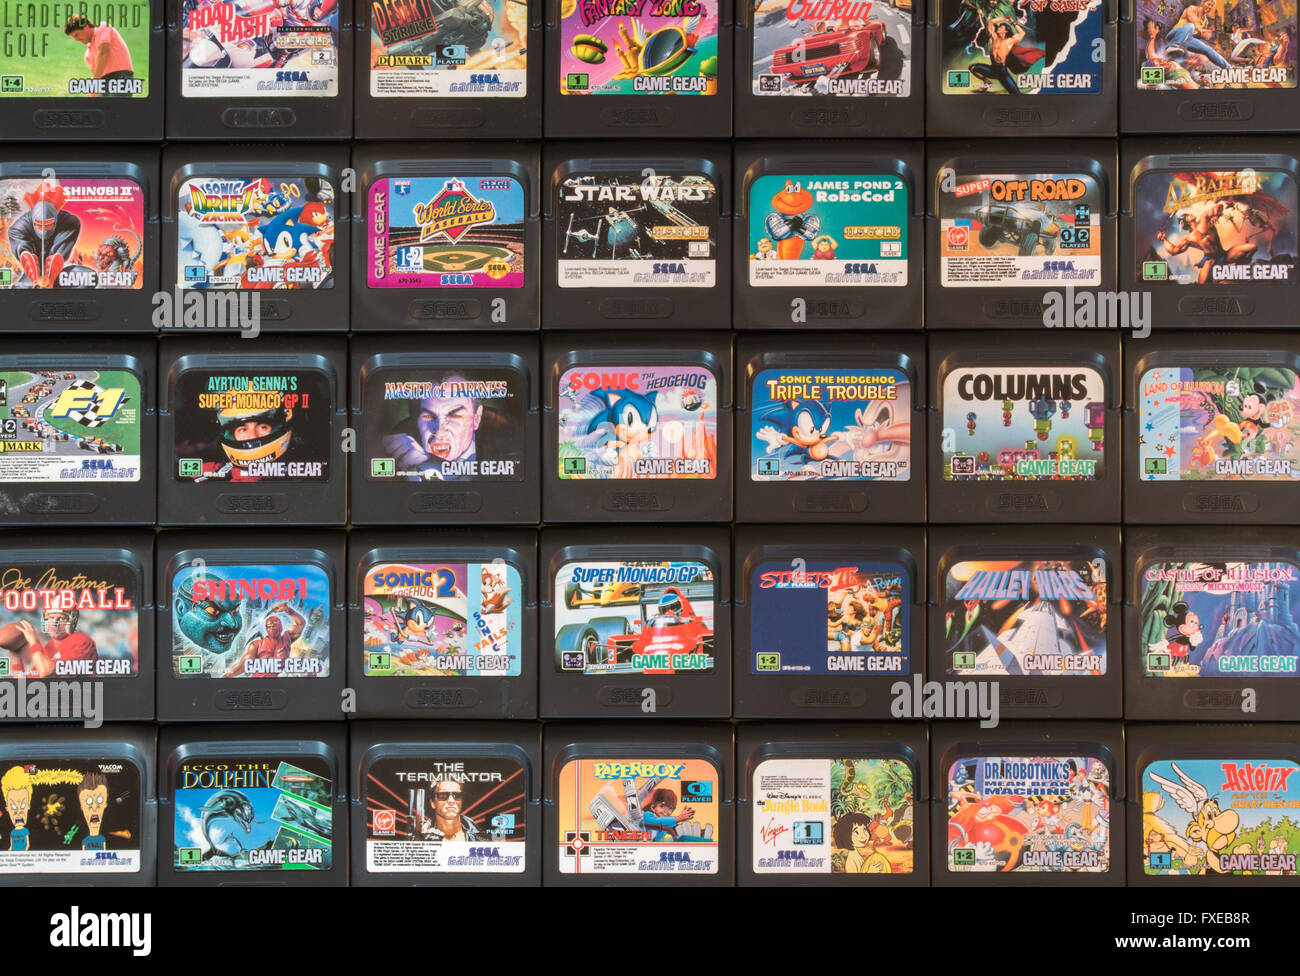 Sega Game Gear videogame cartridges from the 1990s, including Sonic the Hedgehog, Columns, Super Monaco GP, OutRun and Star Wars Stock Photo